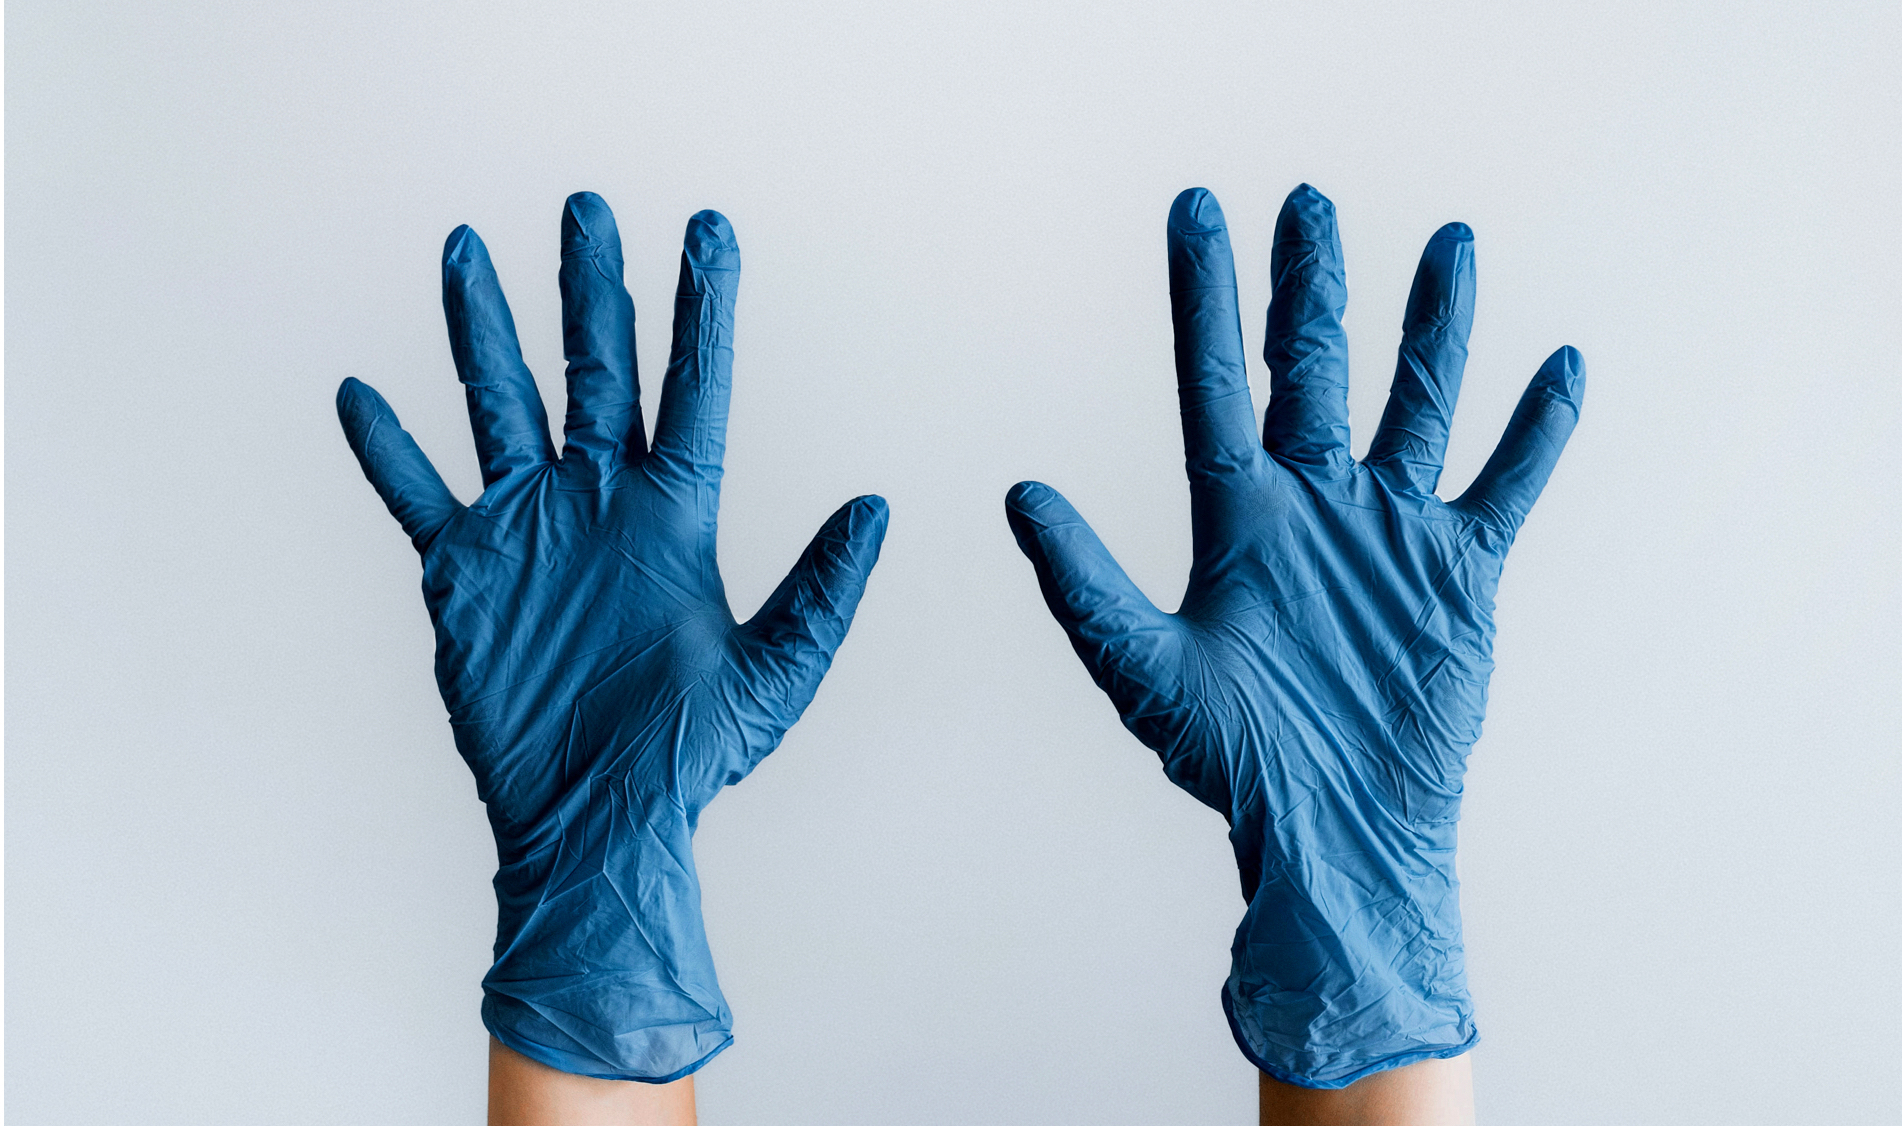 Two hands pointing upward, wearing blue latex gloves